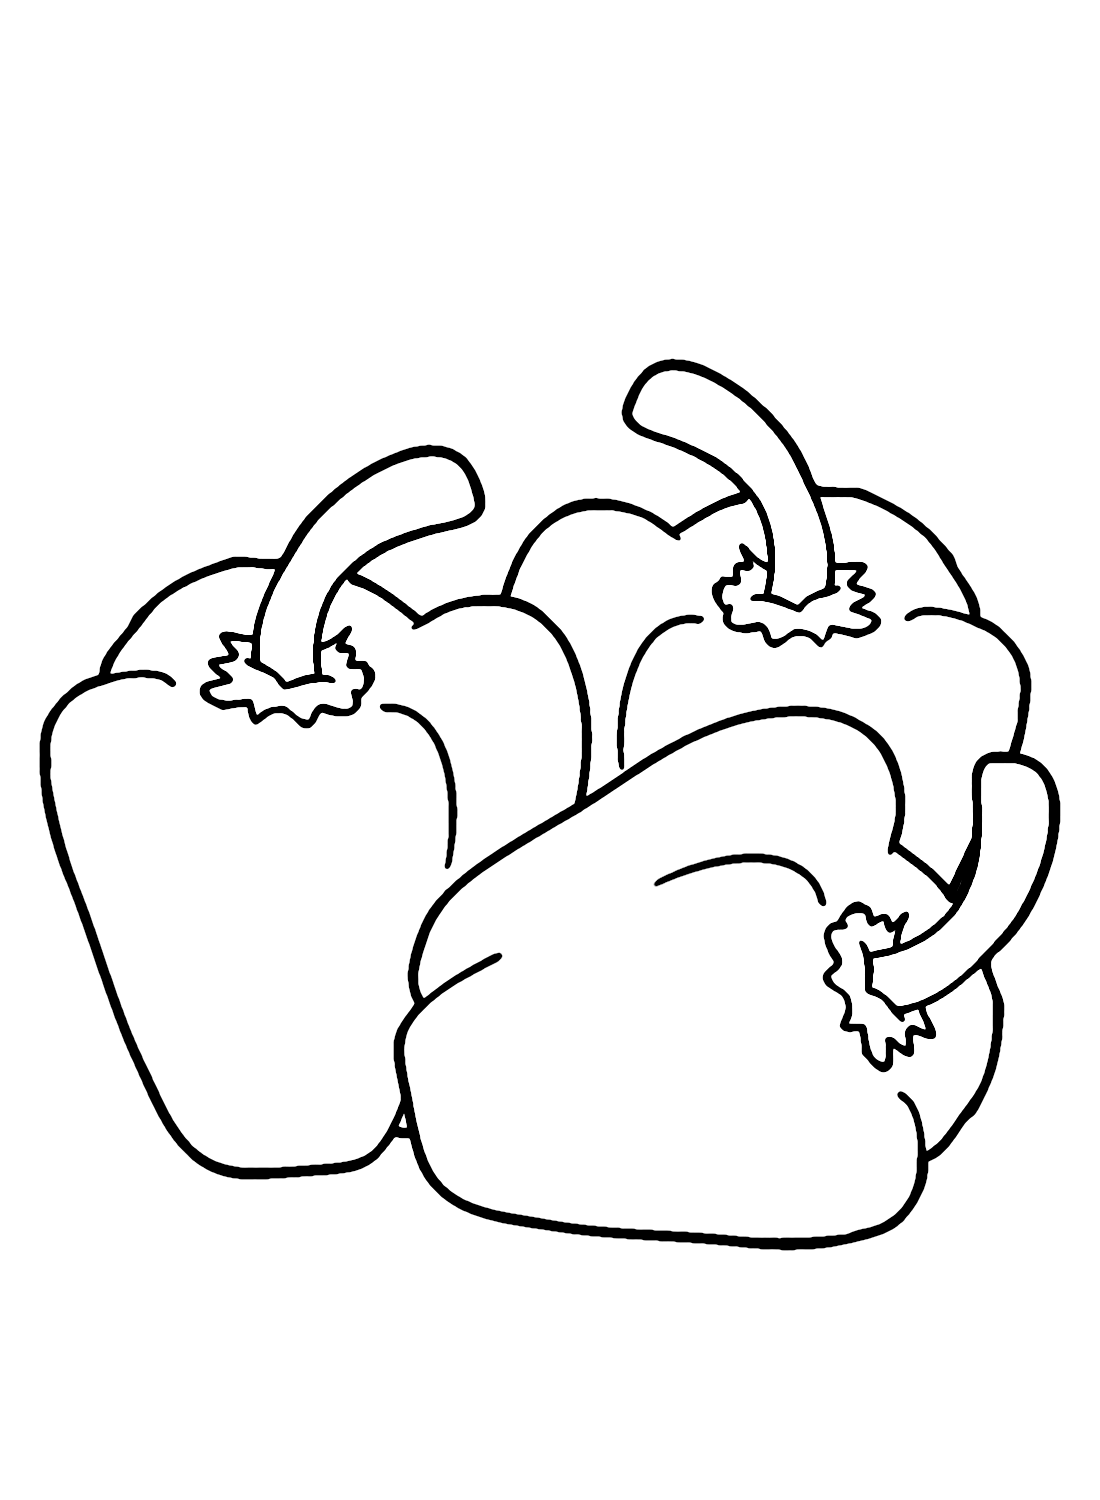 Bell Pepper Colors Coloring Page